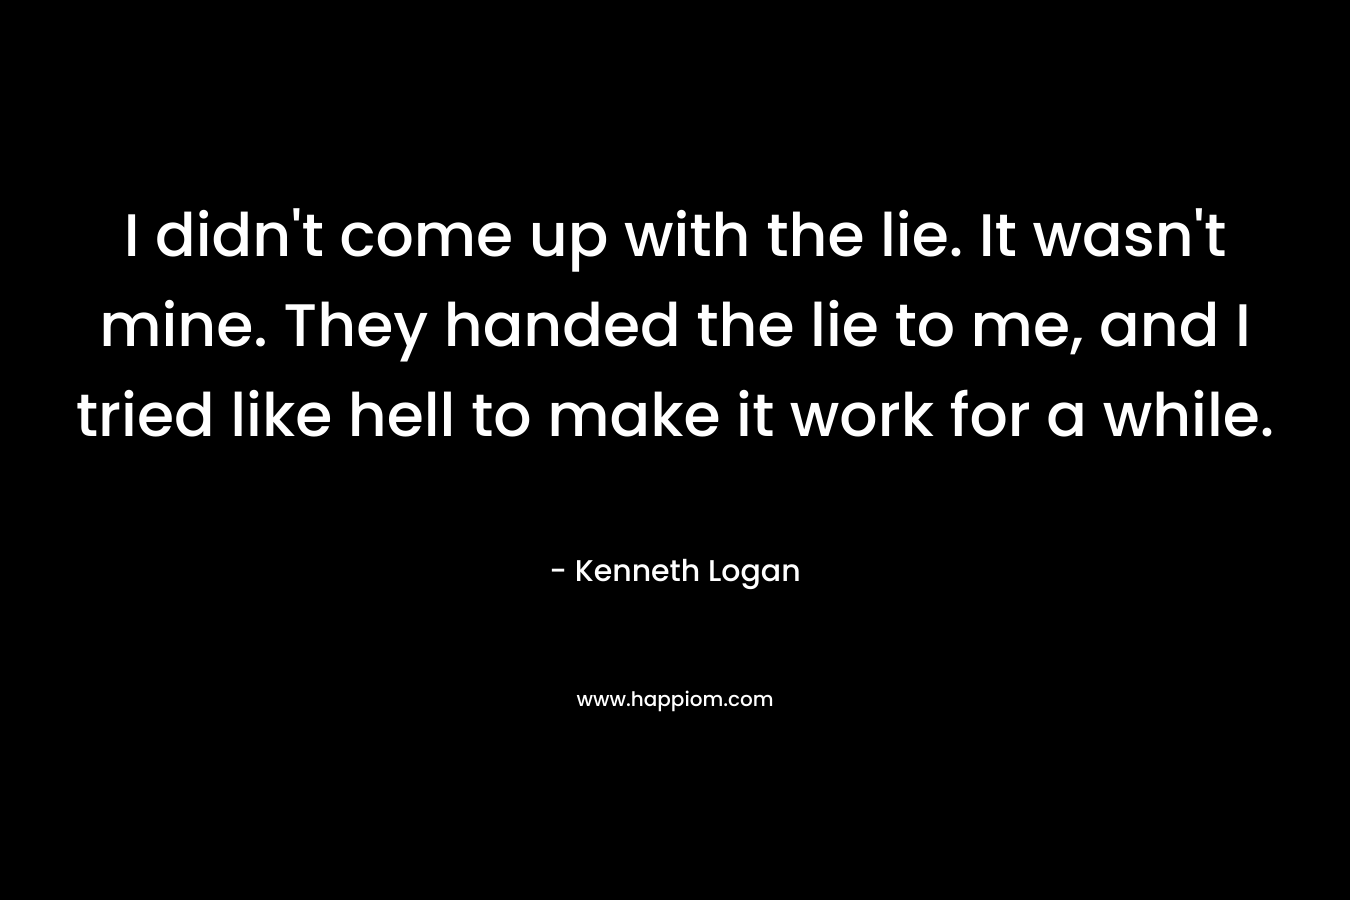 I didn’t come up with the lie. It wasn’t mine. They handed the lie to me, and I tried like hell to make it work for a while. – Kenneth Logan